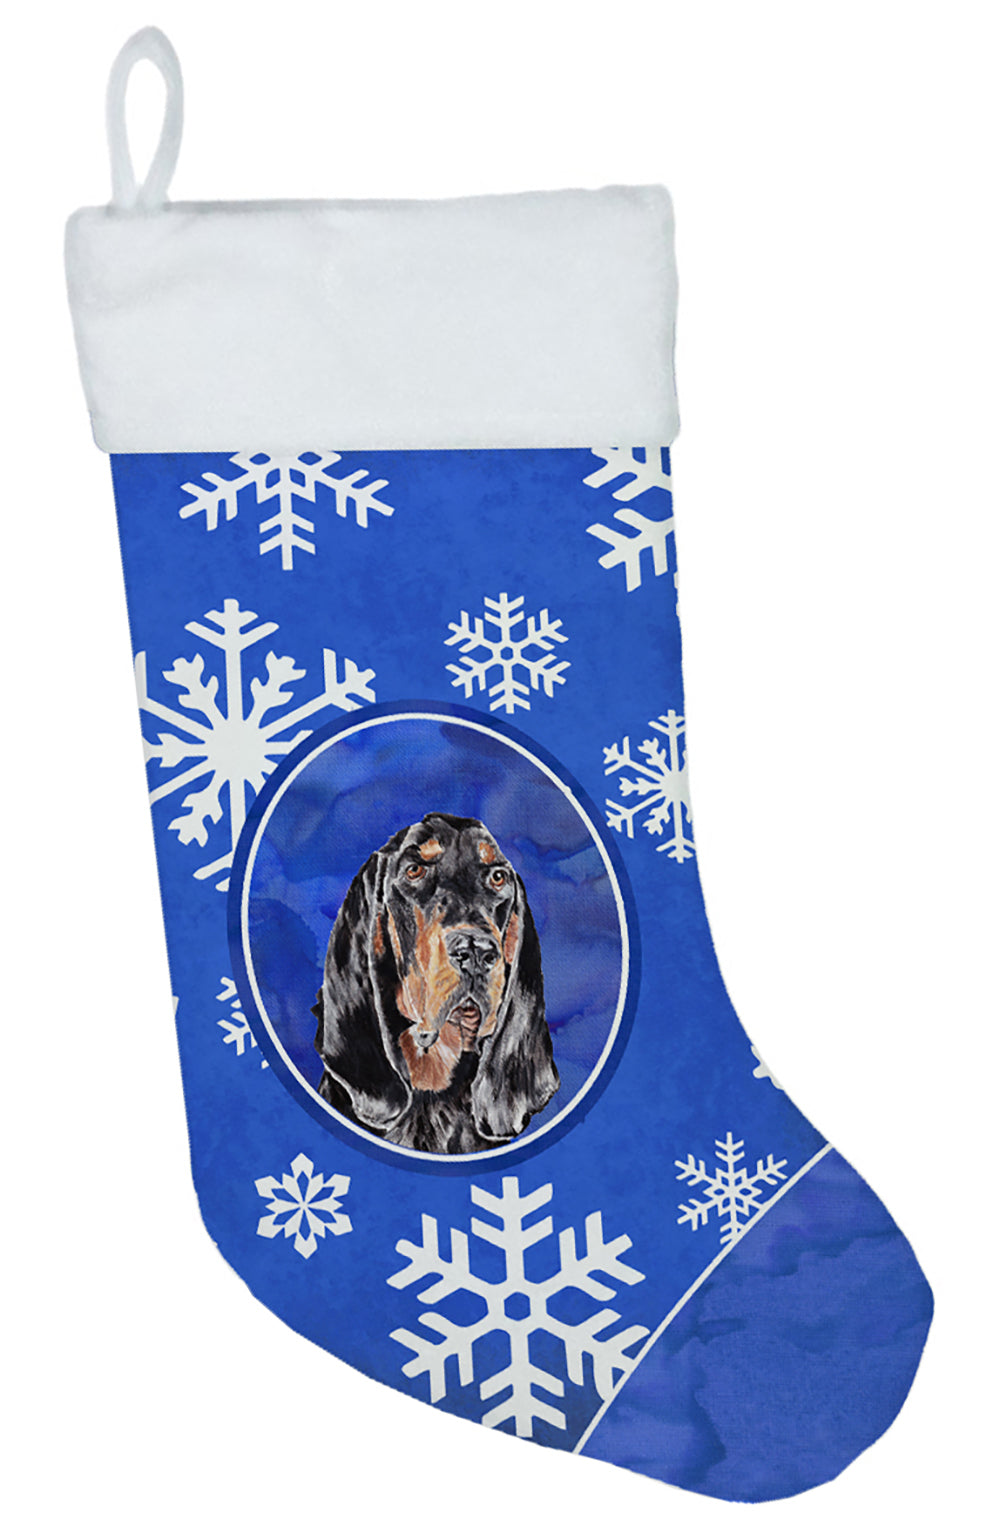 Black and Tan Coonhound Winter Snowflakes Christmas Stocking SC9595-CS